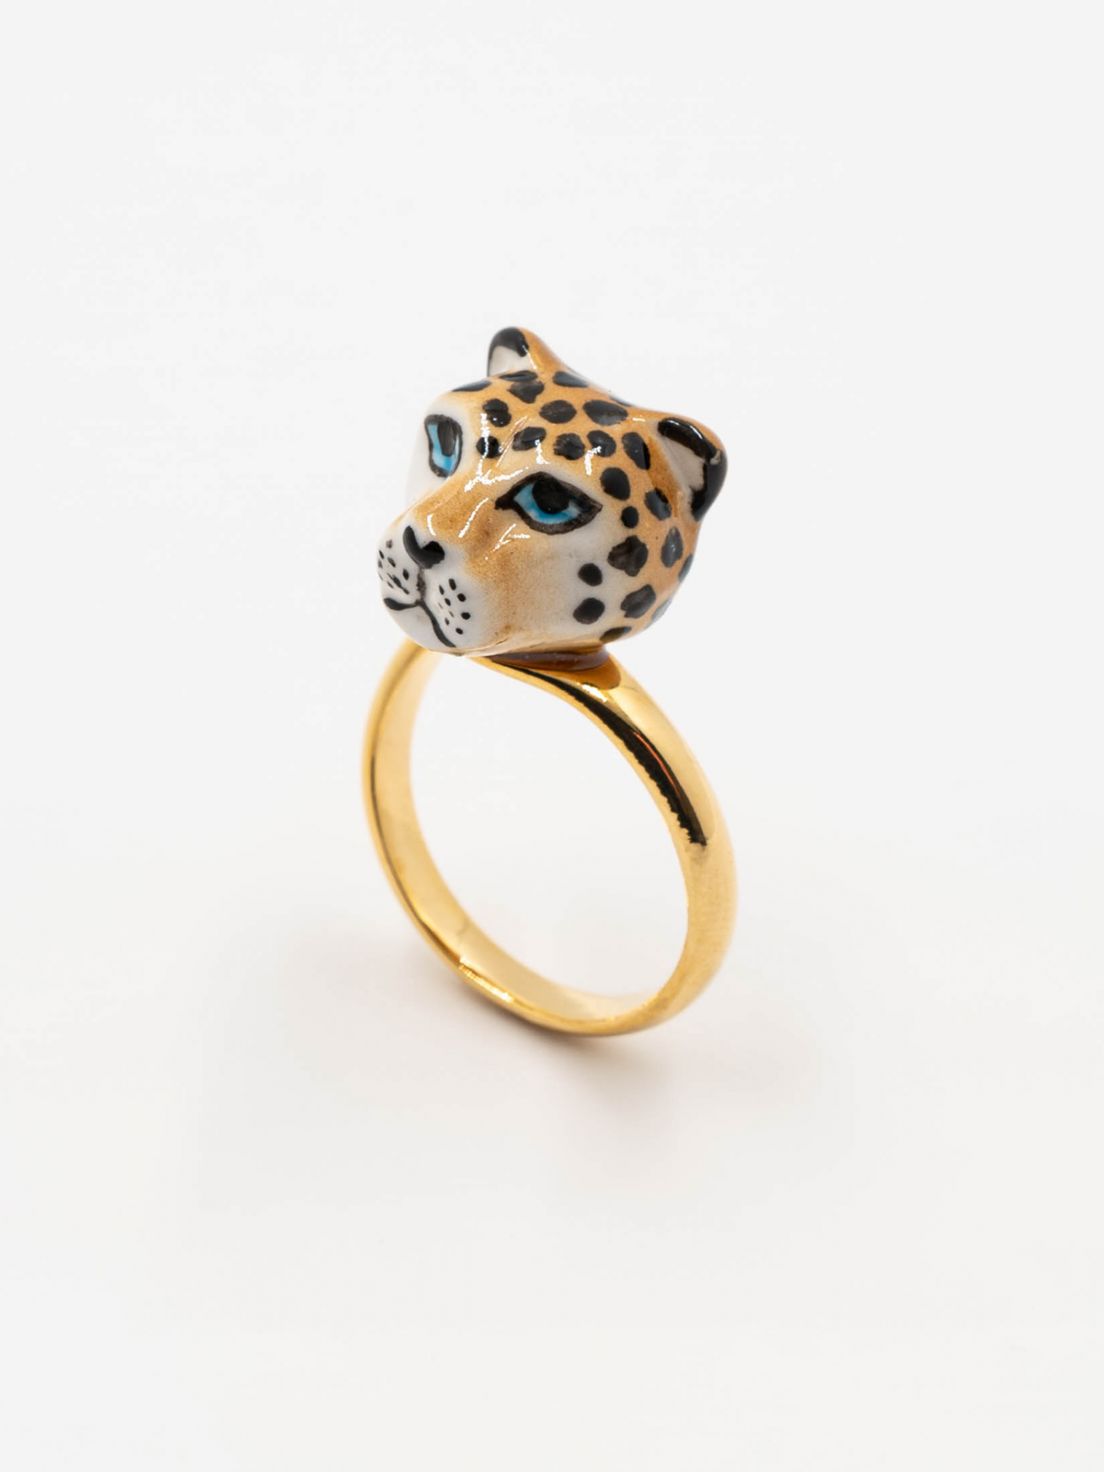 Animal Leopard Ring 3 High Quality, Neutral, Two Tone Design With